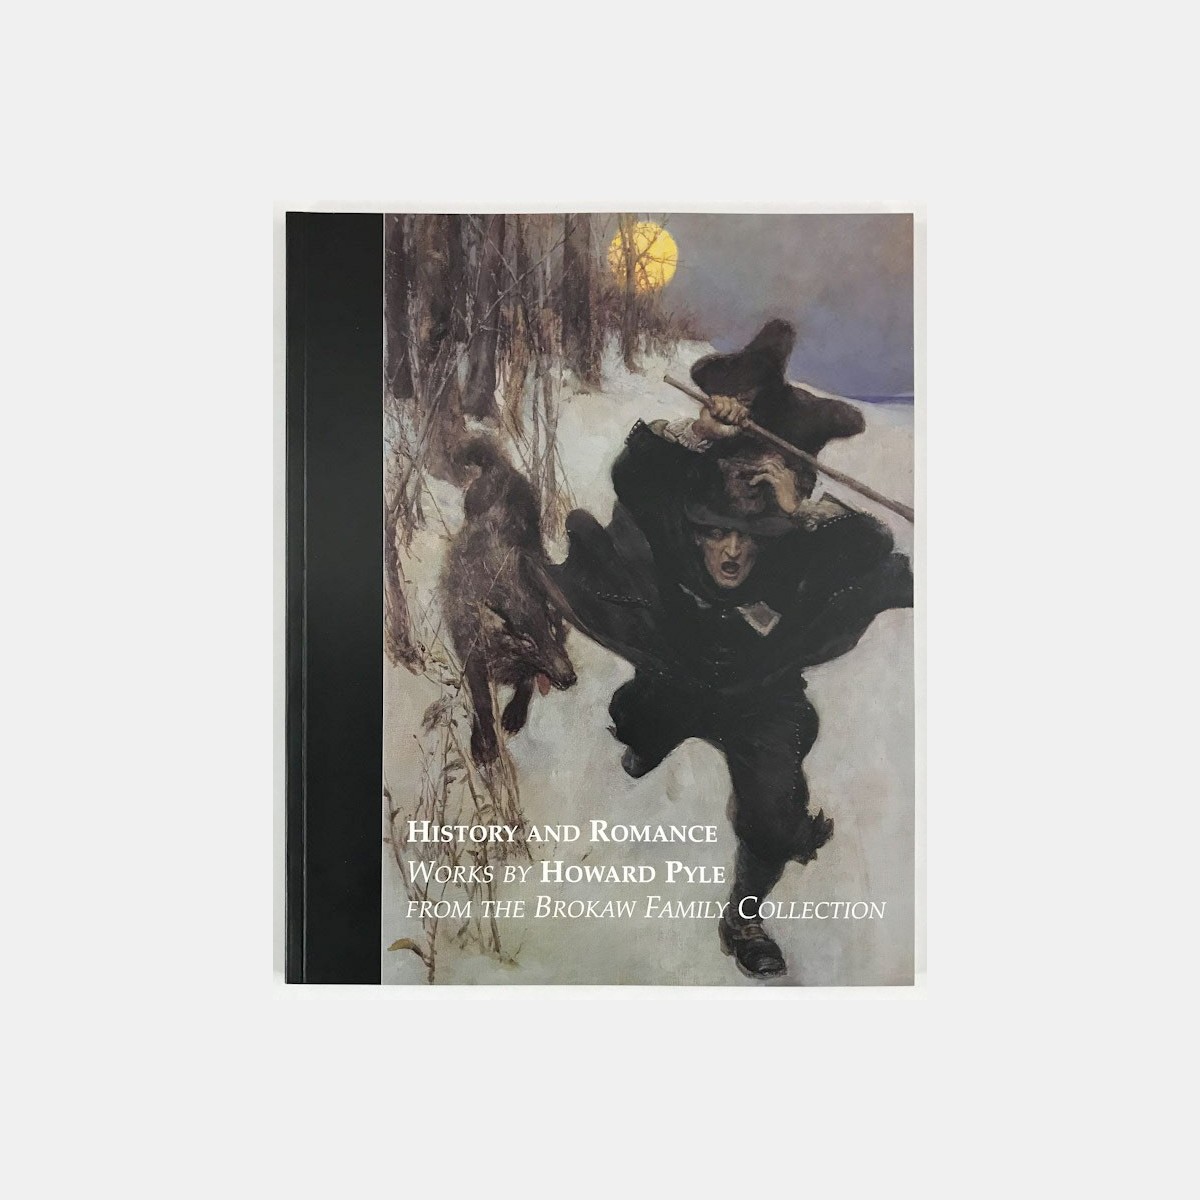 History and Romance: Works by Howard Pyle from the Brokaw Family Collection